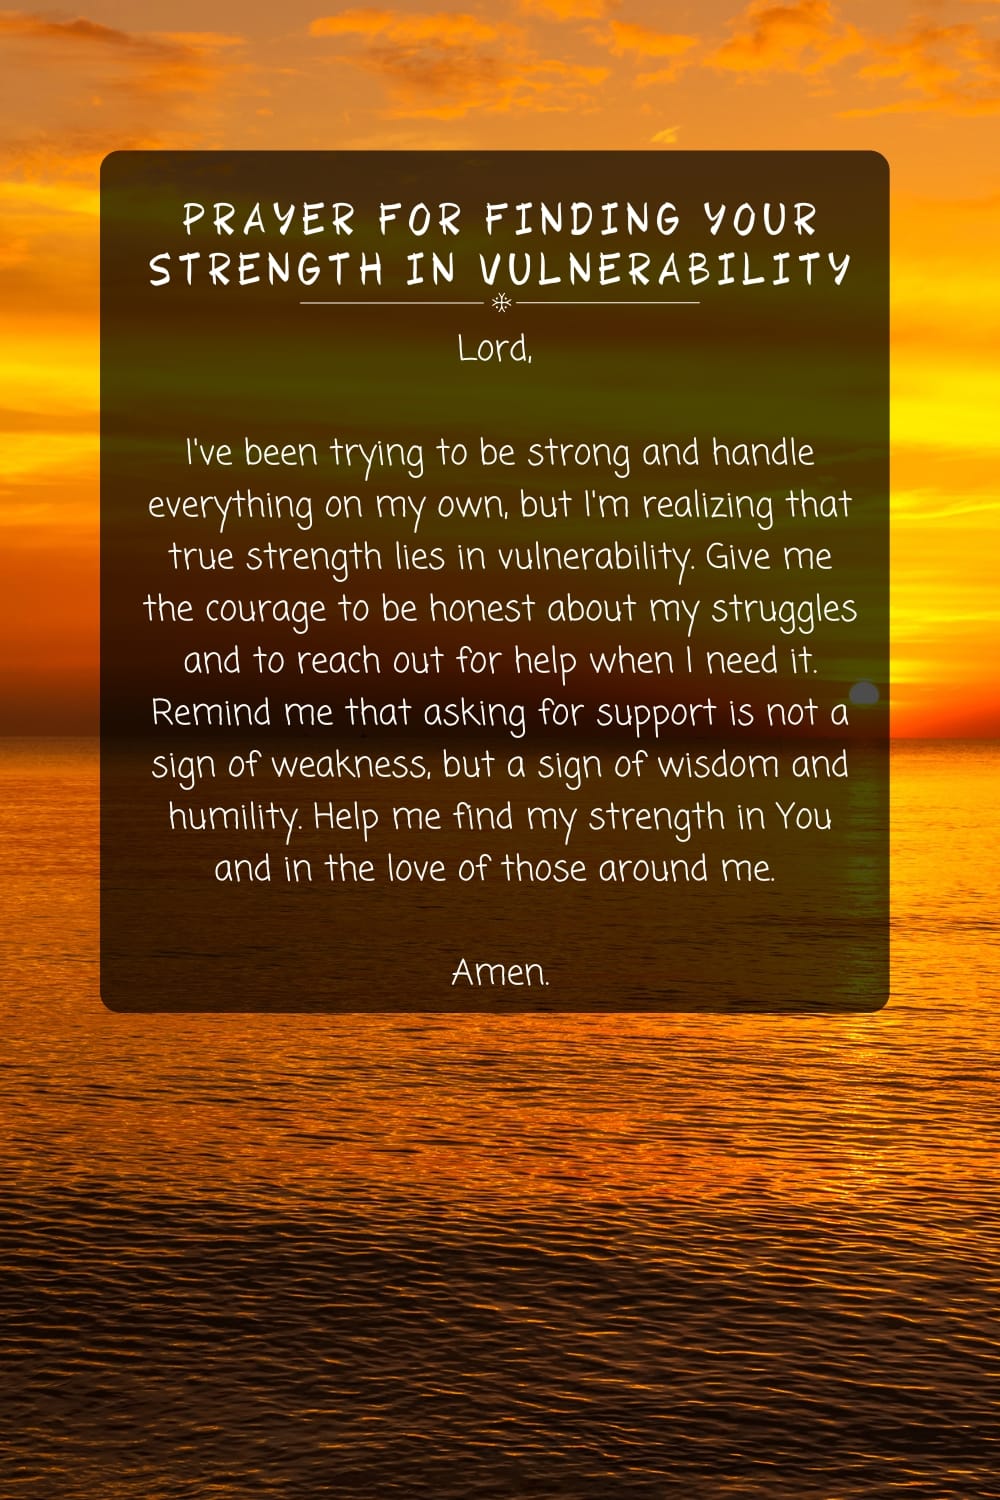 Prayer For Finding Your Strength in Vulnerability